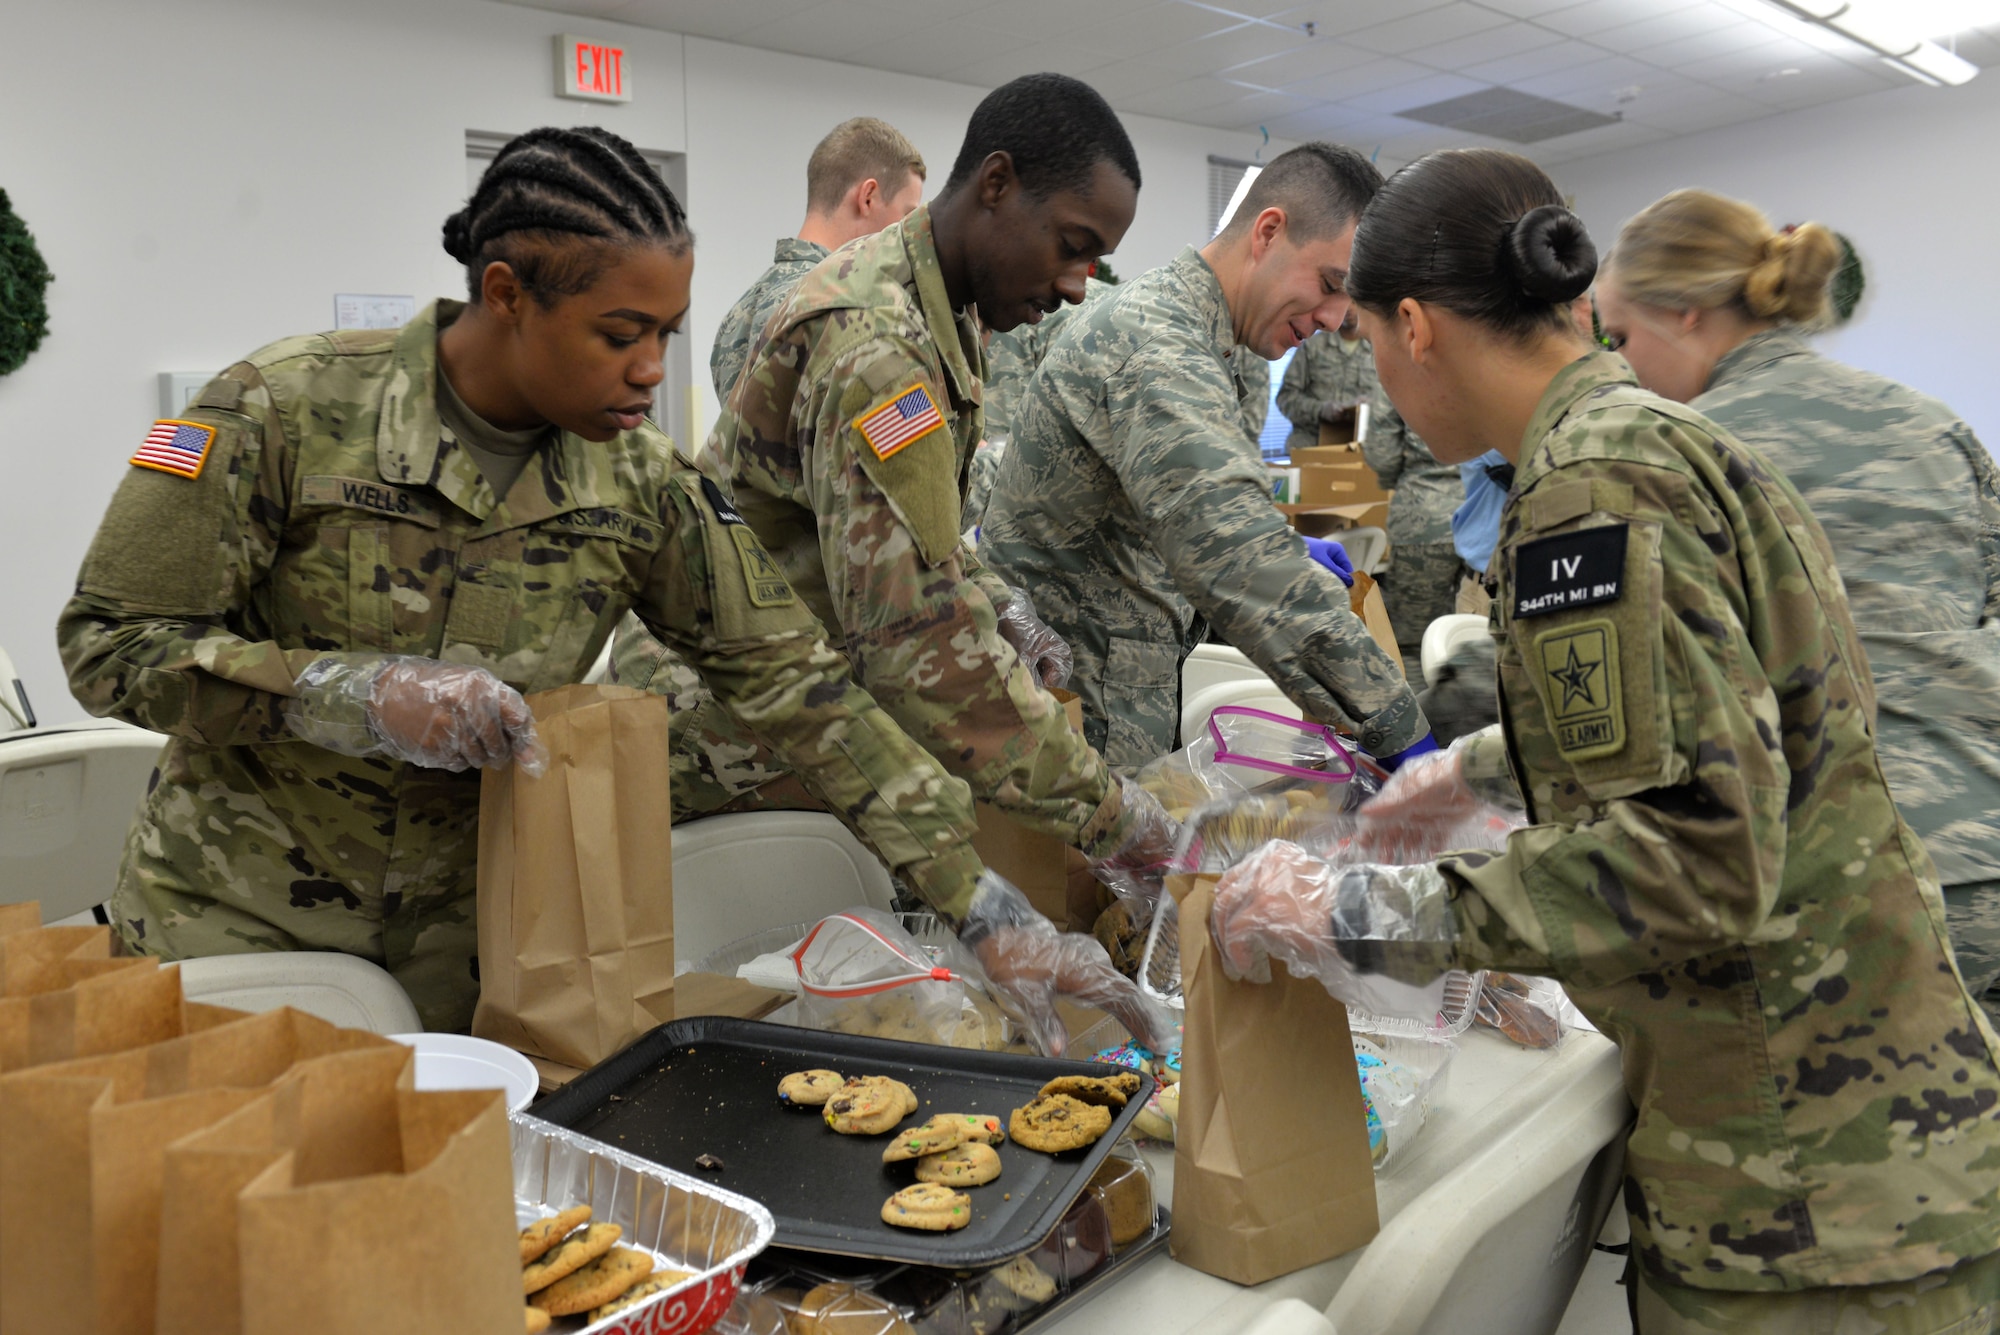 U. S. Army Pvt. Kiara Wells, 344th Military Intelligence Battalion trainee and Pvt. John Tracy, 344th MIBN trainee, prepare bags of cookies at the Taylor Chapel on Goodfellow Air Force Base, Texas, for distribution to Goodfellow trainees Dec. 20, 2017. Over 40 volunteers gathered at the Taylor Chapel to provide some holiday cheer by filling bags full of cookies for Goodfellow Airmen before they leave for the holidays.